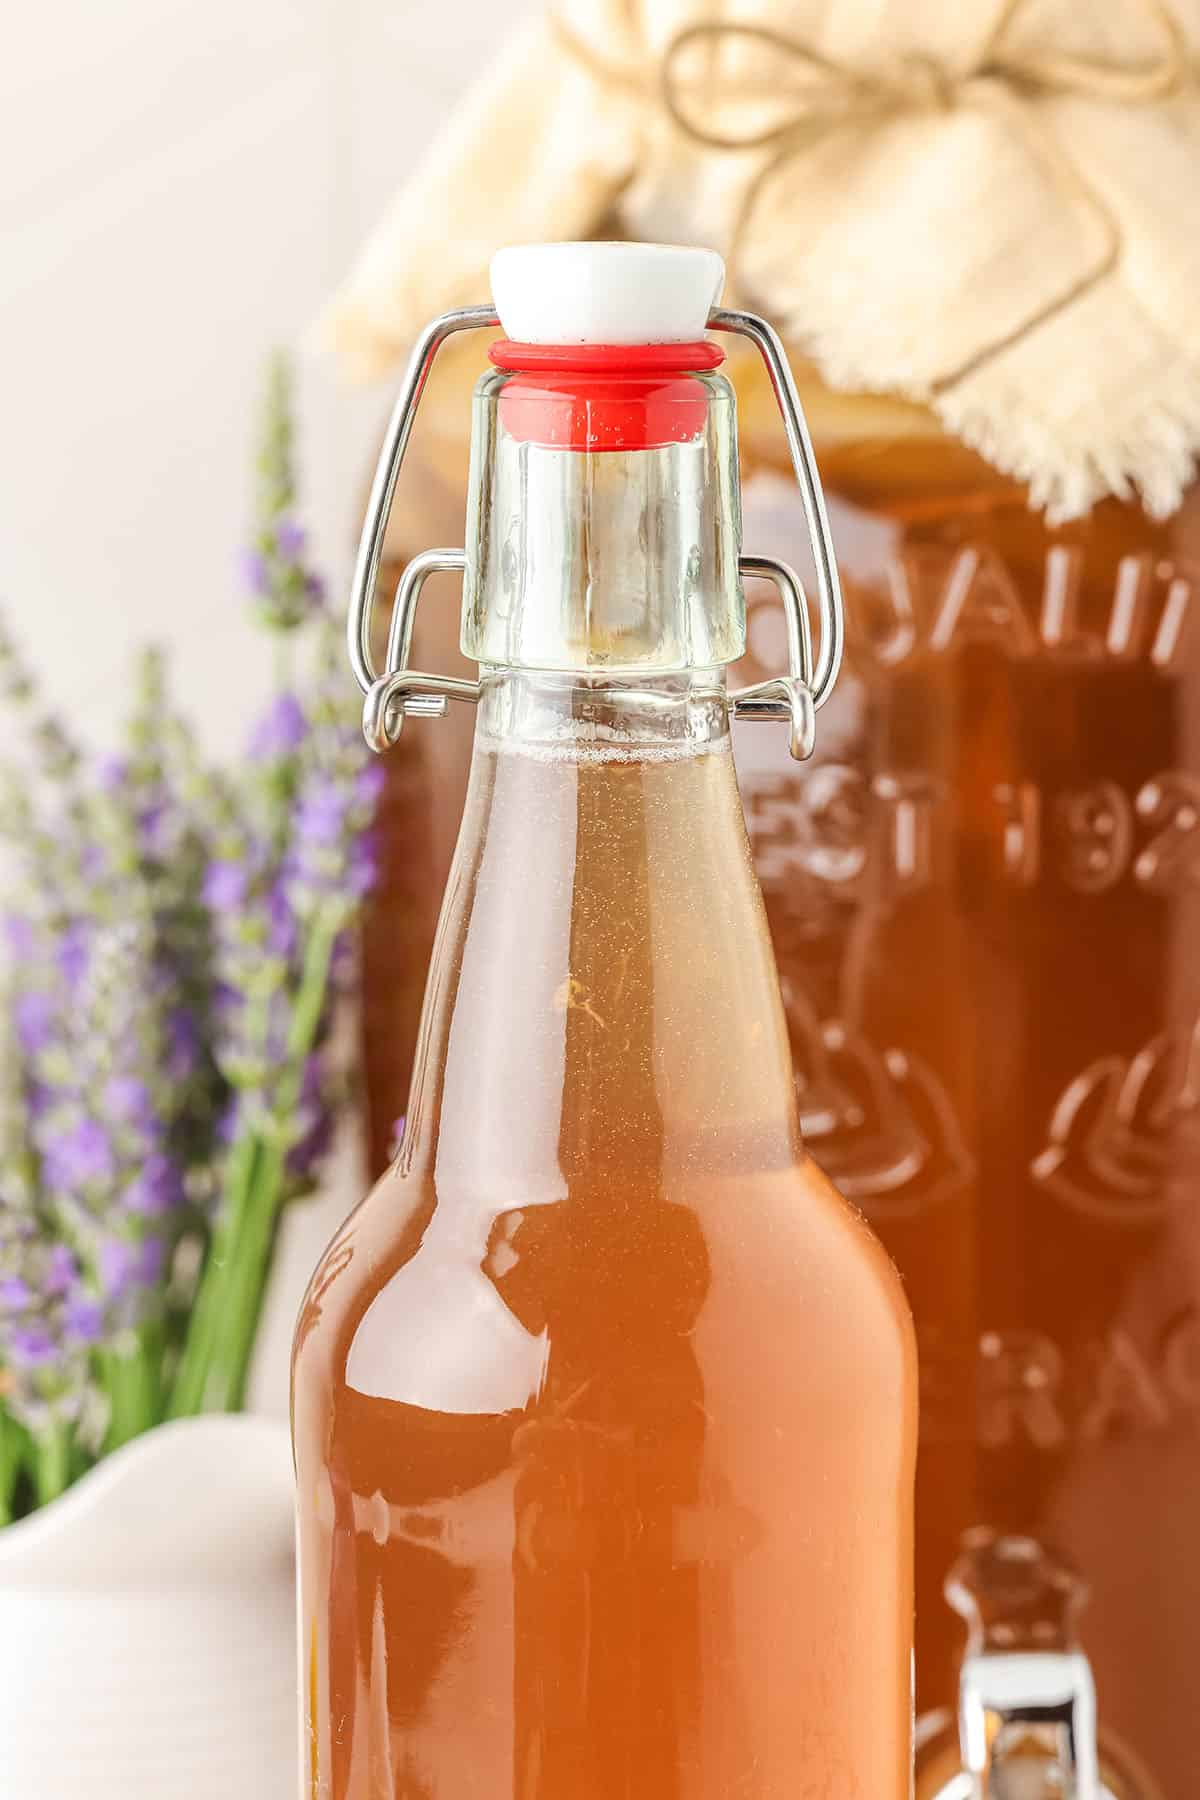 A kombucha bottle with bubbles at the top, close up. With lavender flowers in the background and a gallon jar of kombucha brewing with a cloth on top. 